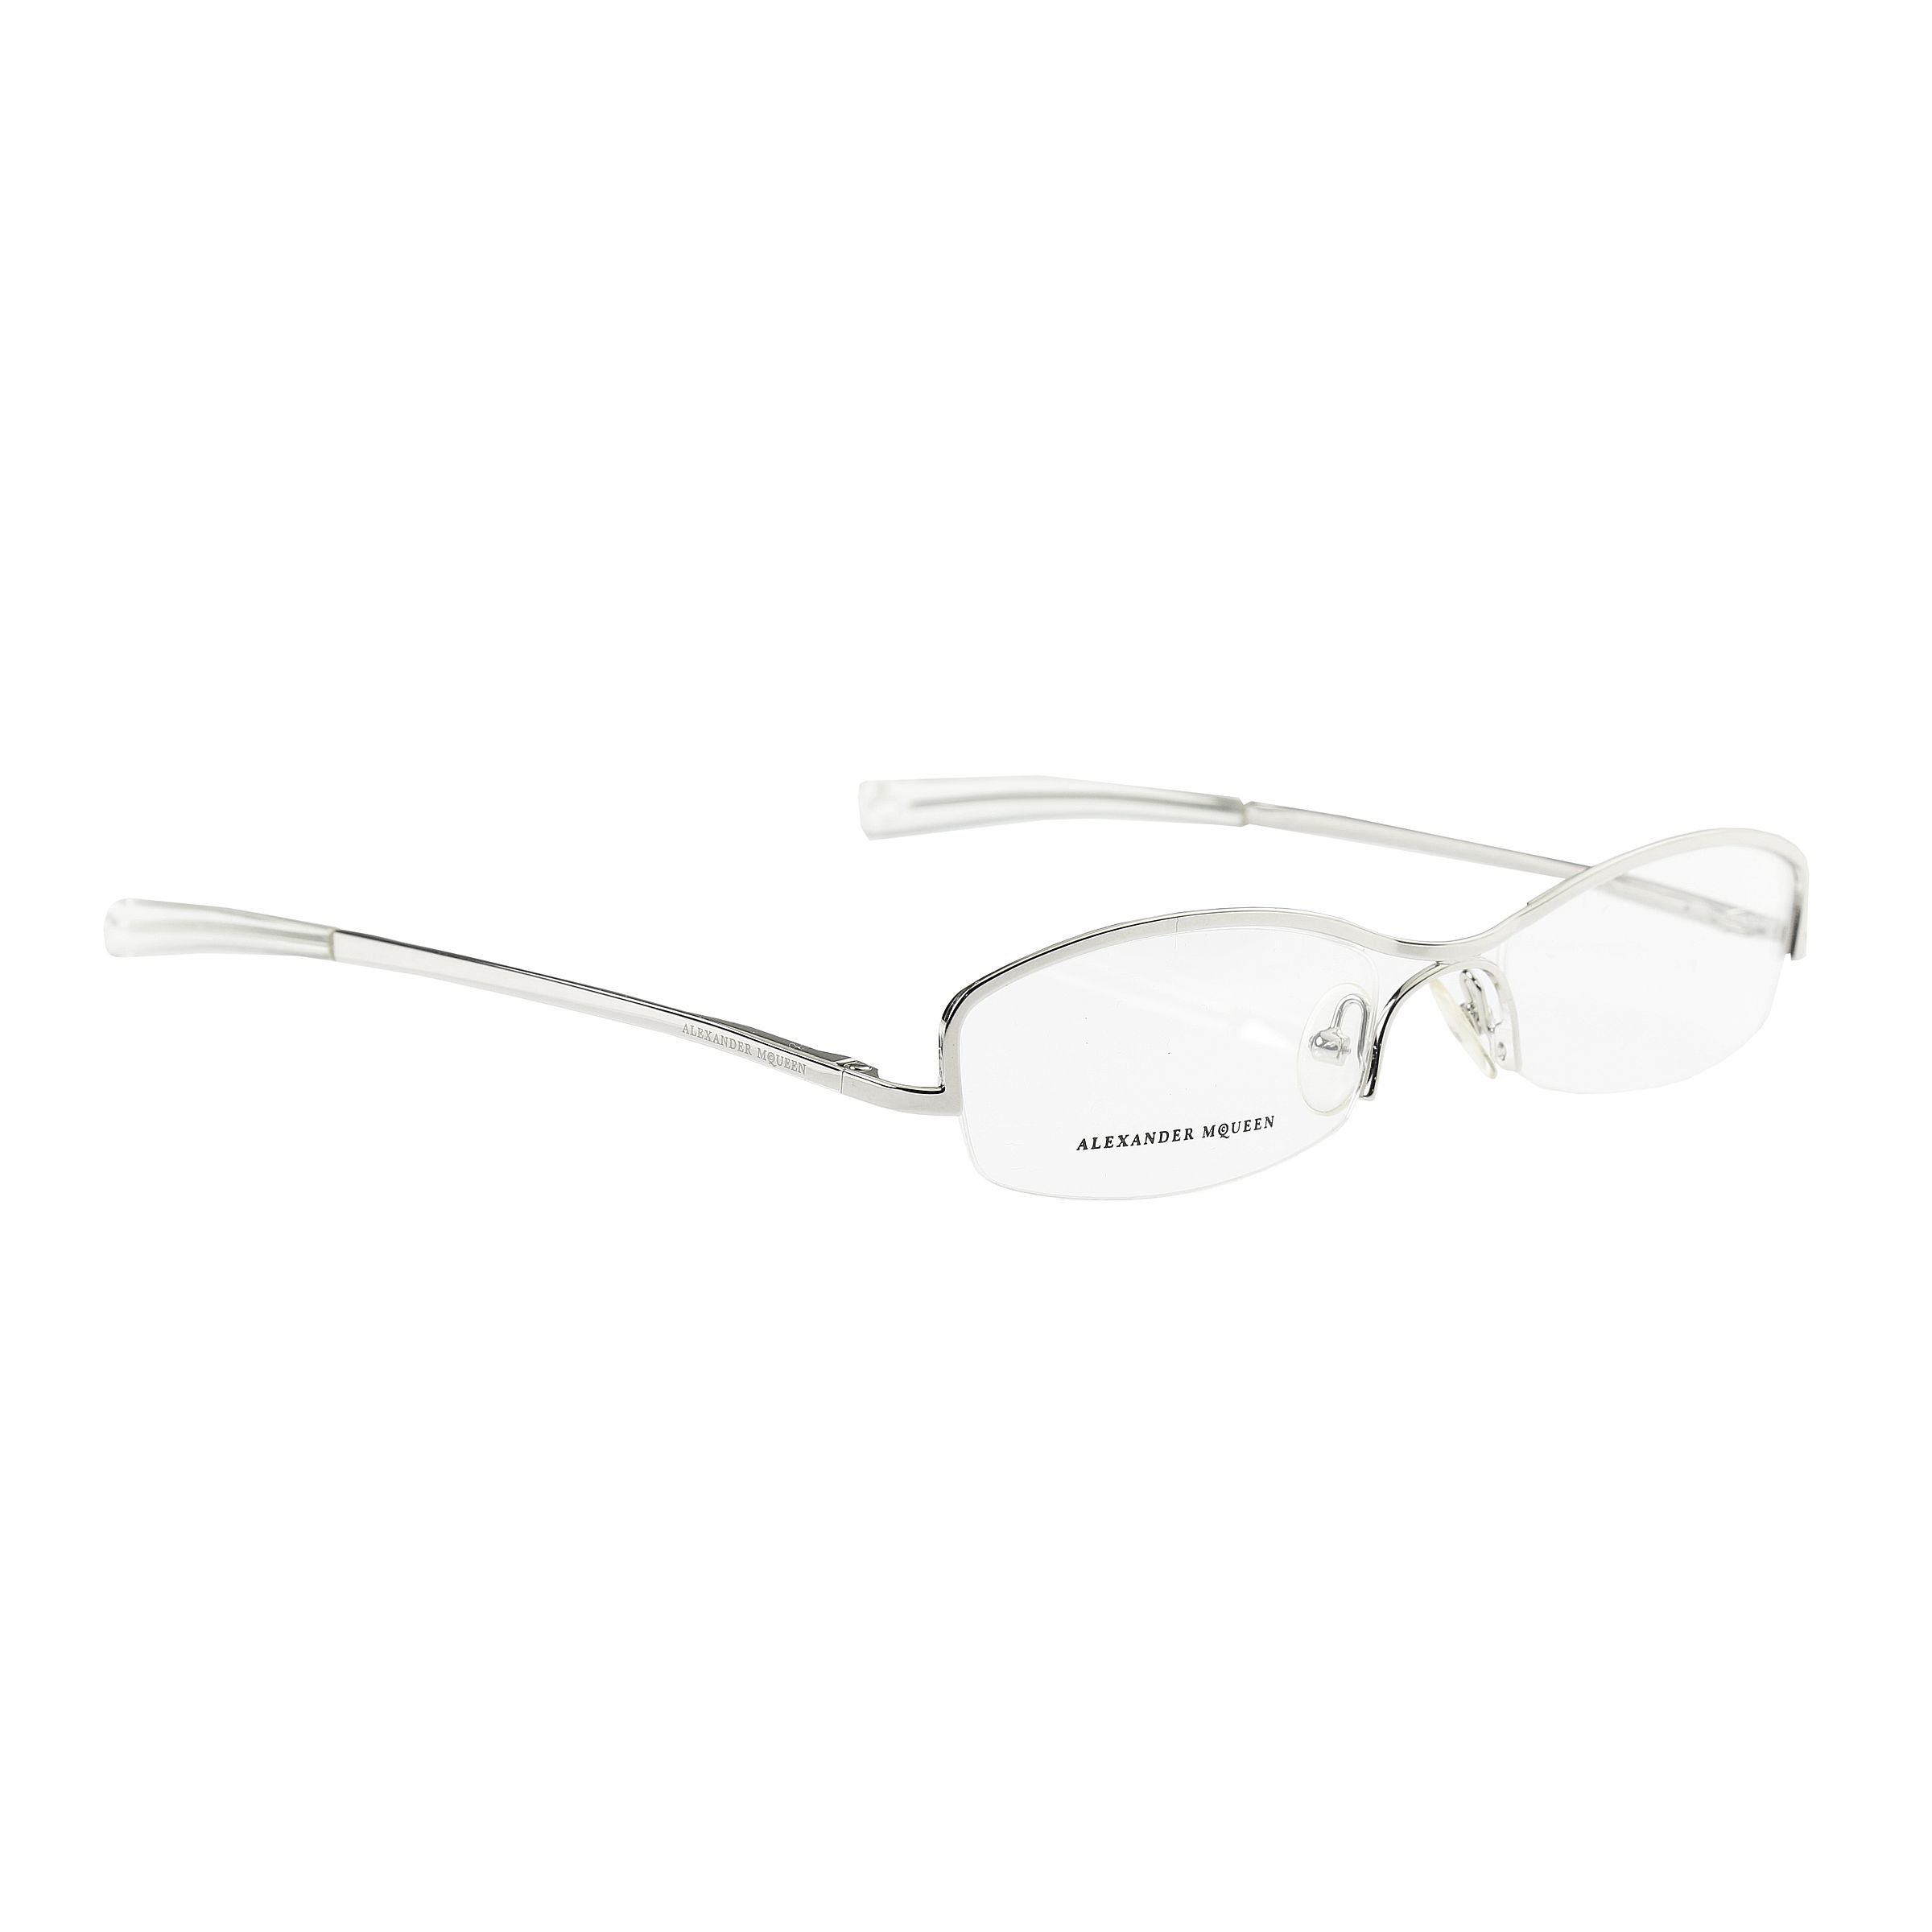 Pre-owned Alexander Mcqueen X Archival Clothing Alexander Mcqueen '90s Silver Frame Glasses